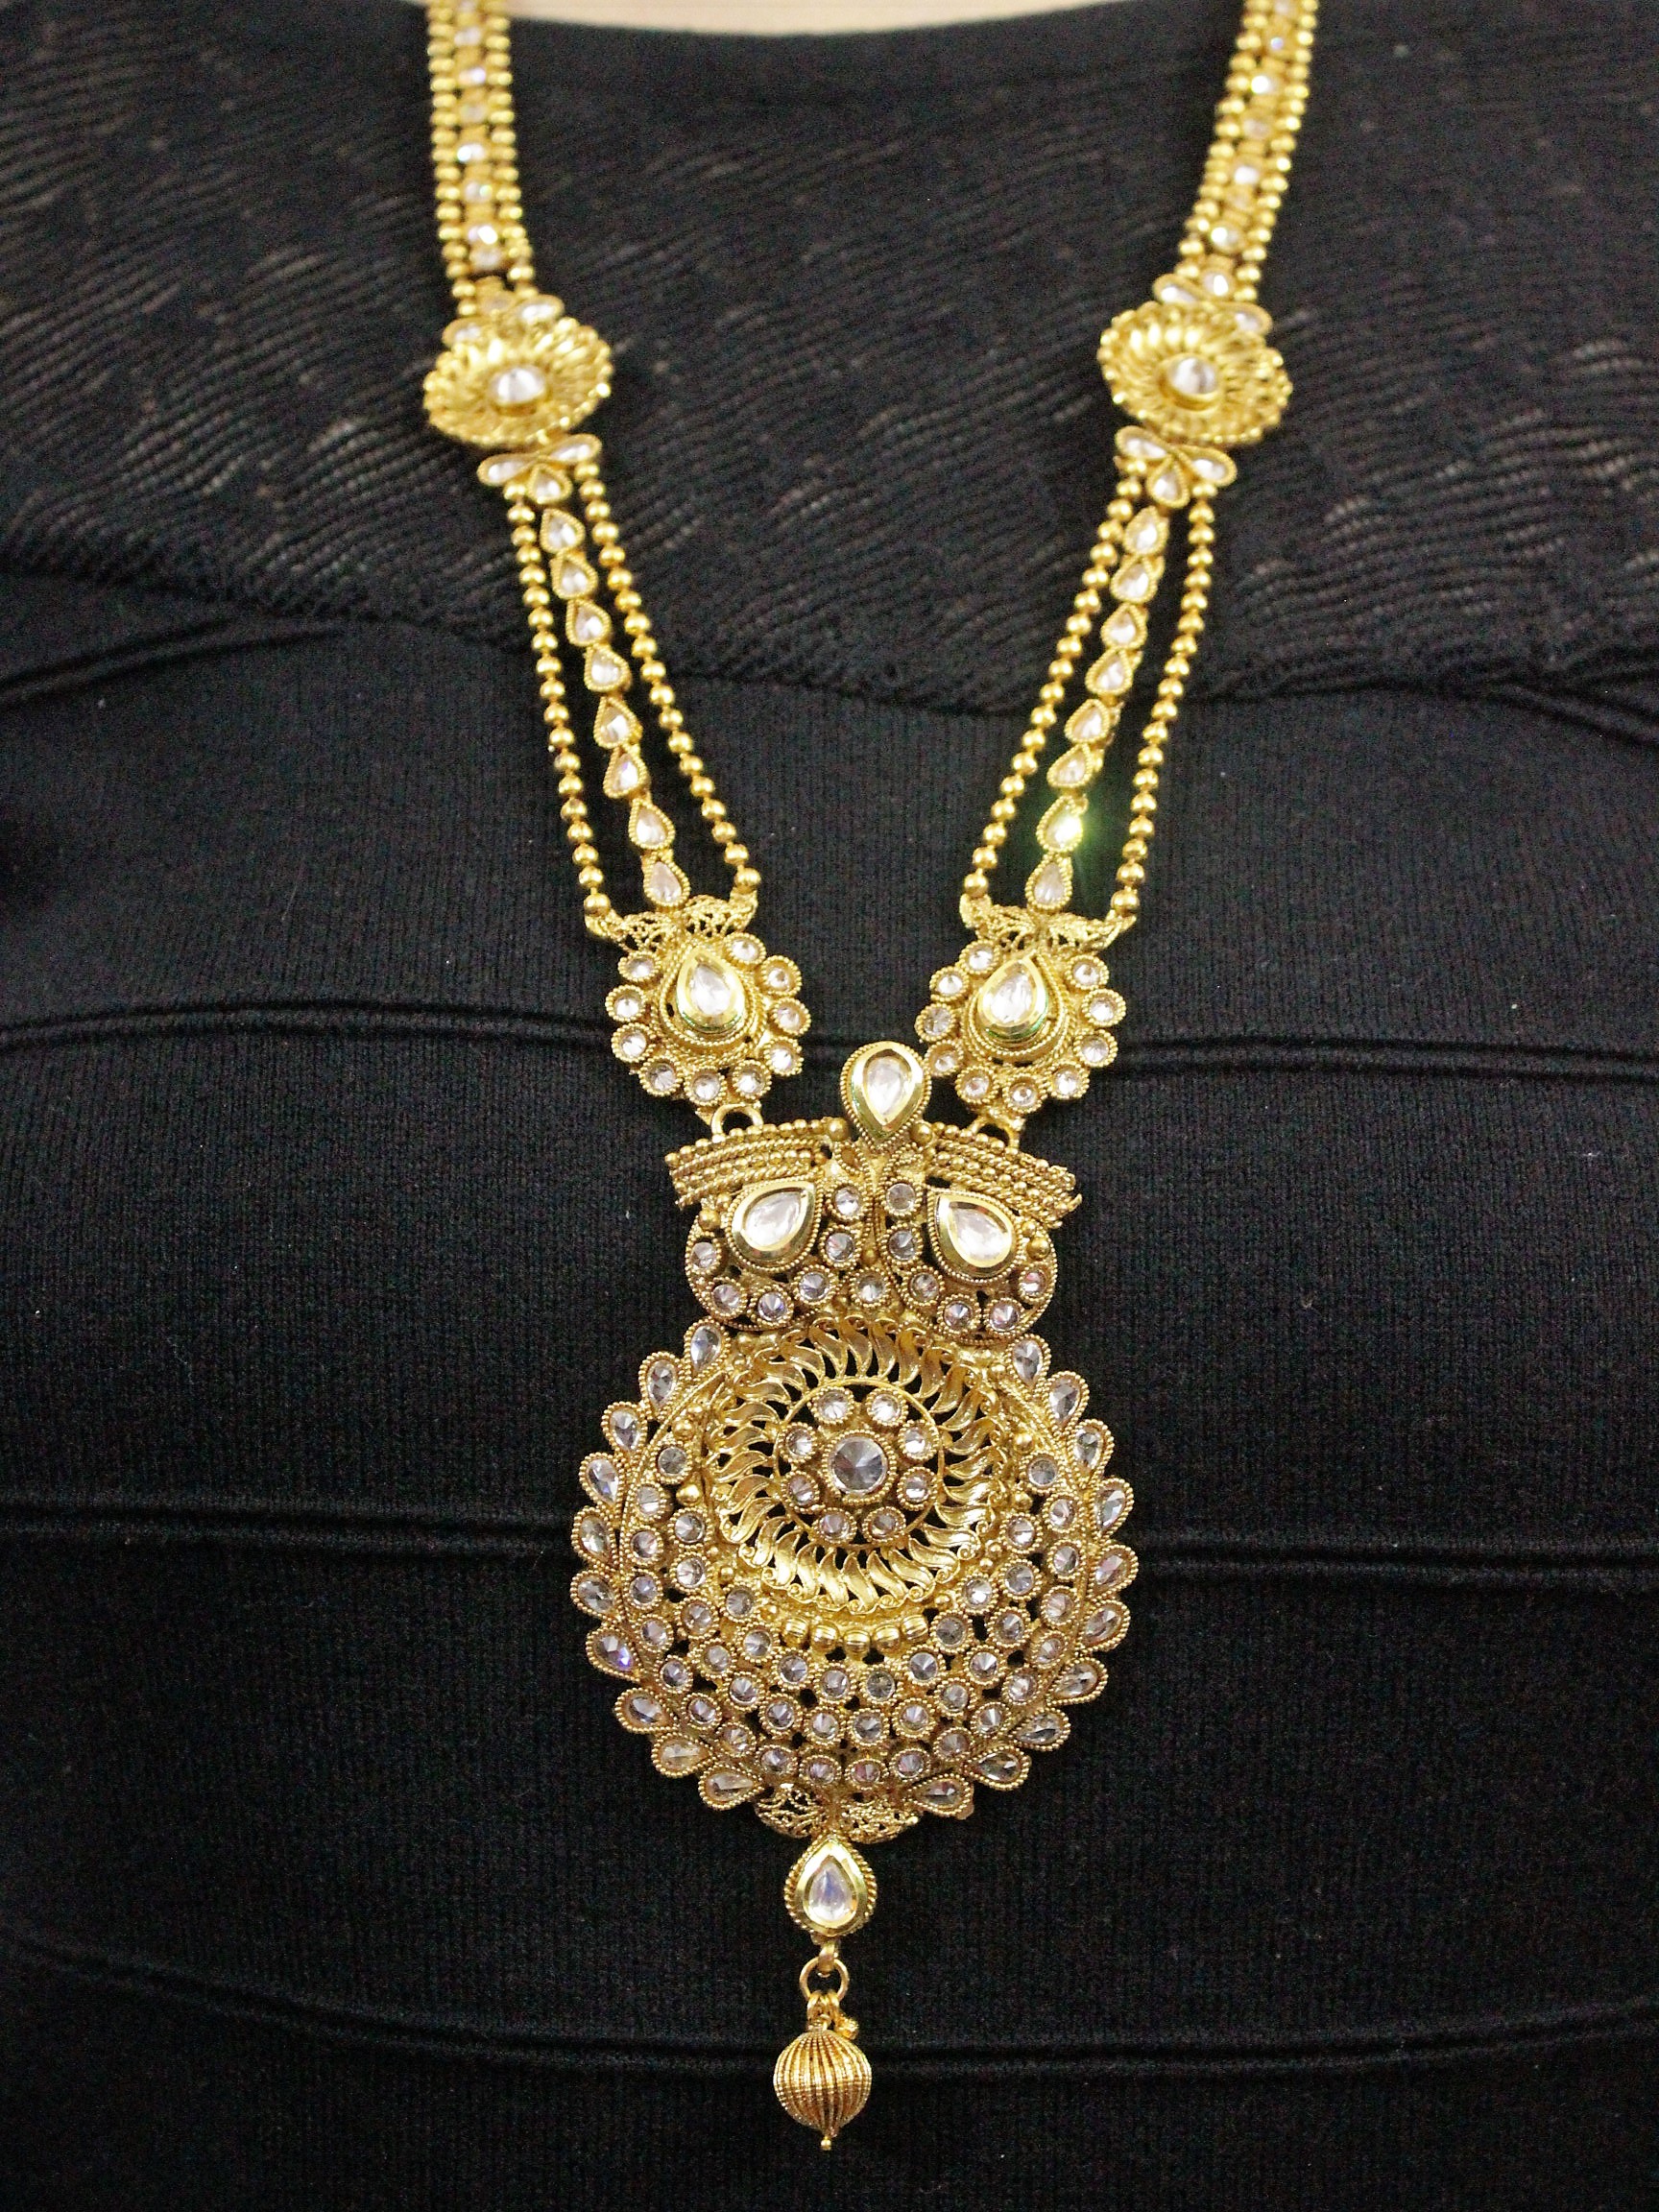 antique jewellery set for bridal in faridabad | IndiHaute | antique jewellery set for bridal face in faridabad , antique jewellery set for bridal for wedding in faridabad , antique jewellery set for bridal formal in faridabad  - GL77289